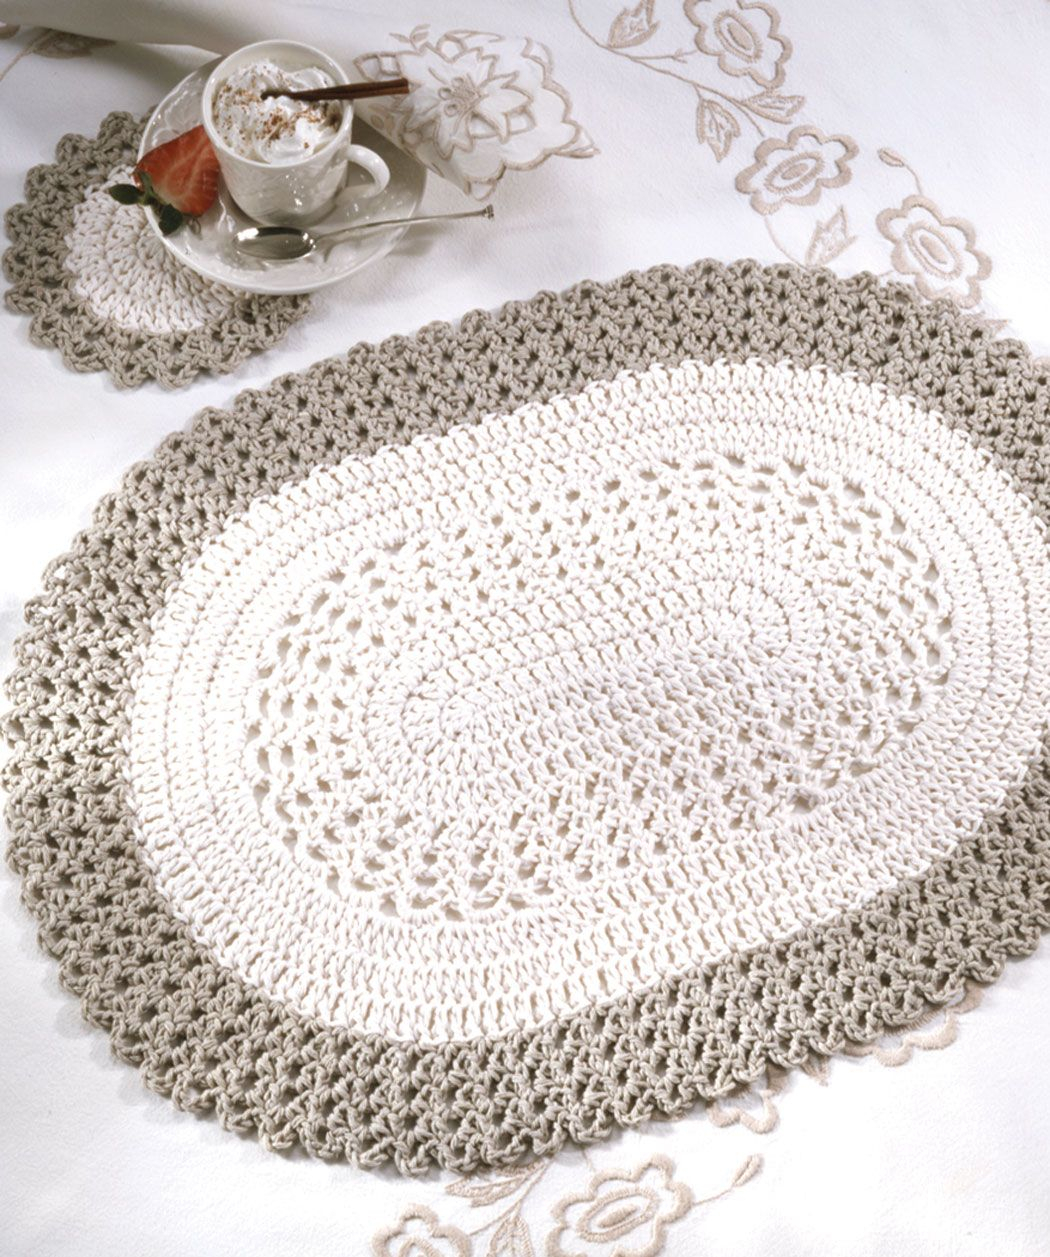 Crochet Placemat Pattern Oval Placemat Cute As Is But Would Be Cool To Use Chunky Yarn And